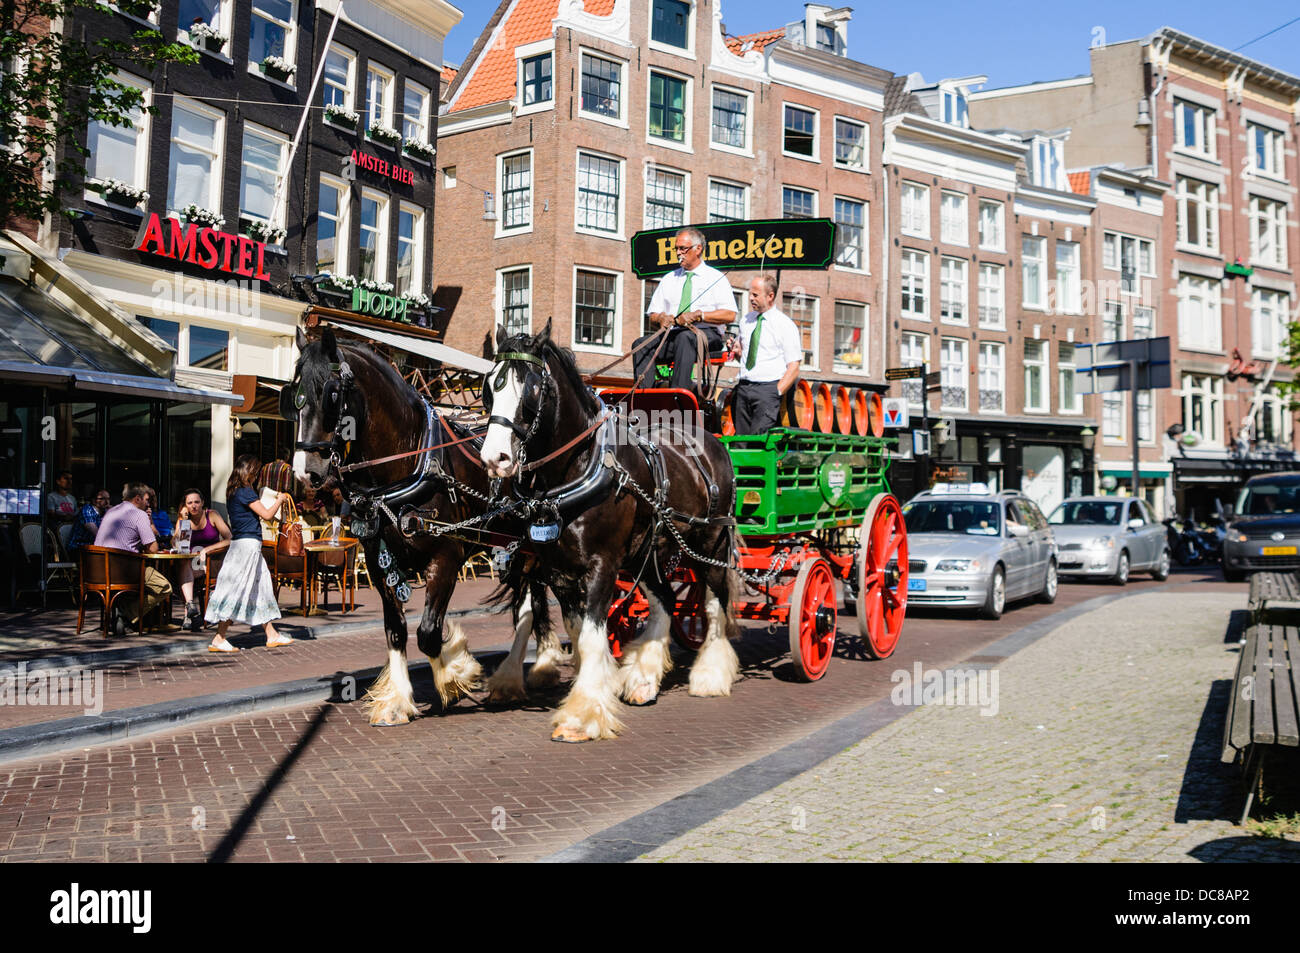 A horsedrawn carriage from the Heineken Brewery in Amsterdam being pulled along Spui. Stock Photo